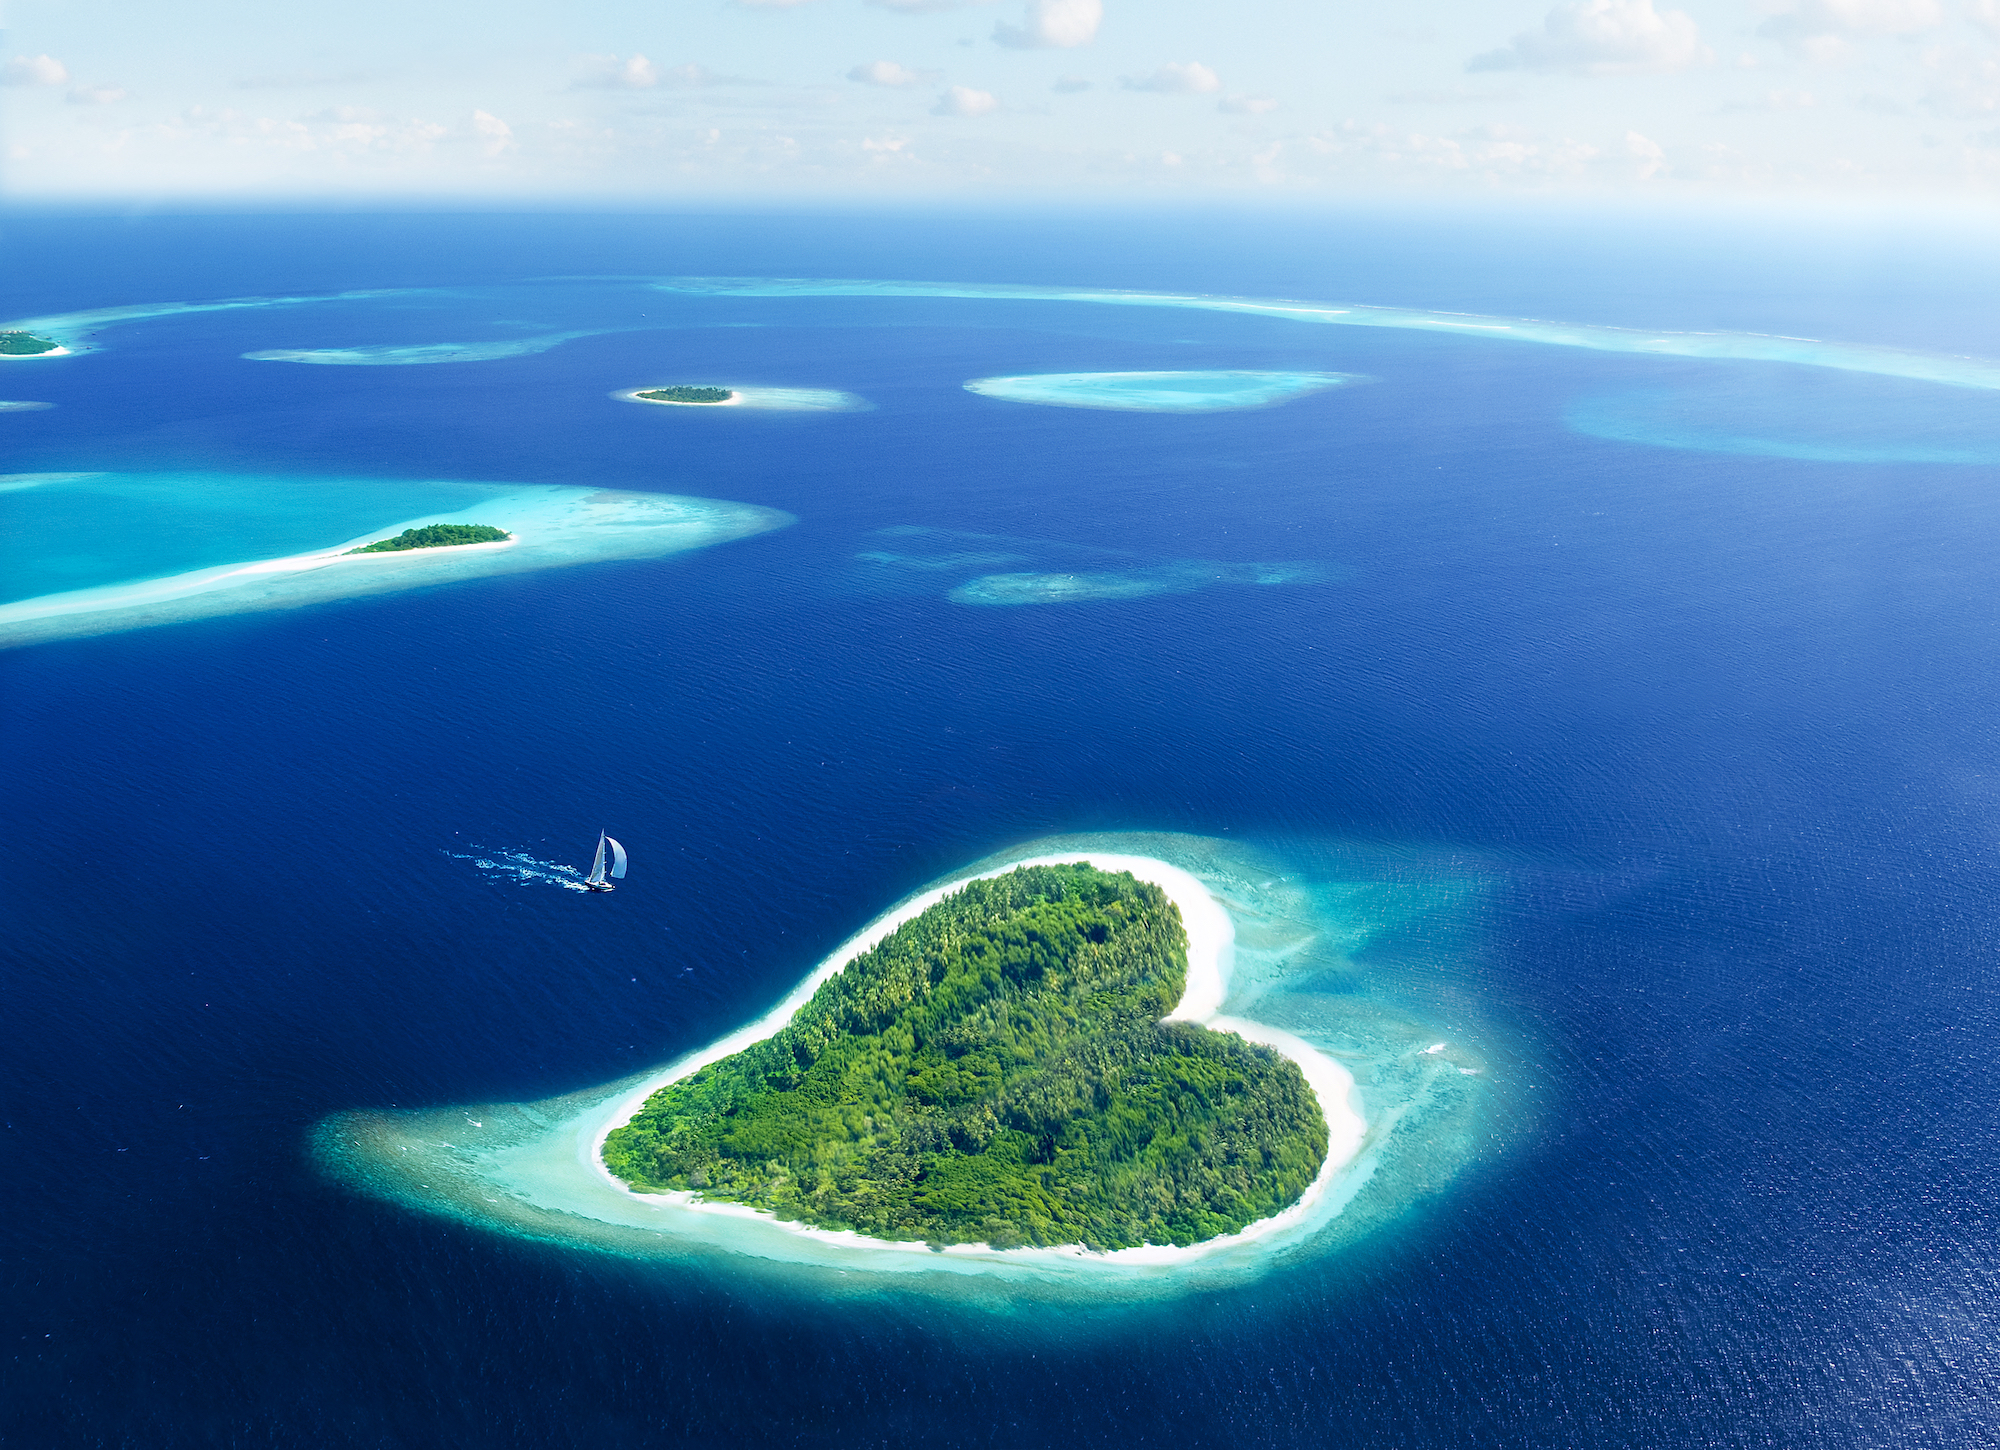 A lush heart-shaped island in the middle of deep blue ocean, which is the perfect spot for a romantic scuba diving vacation